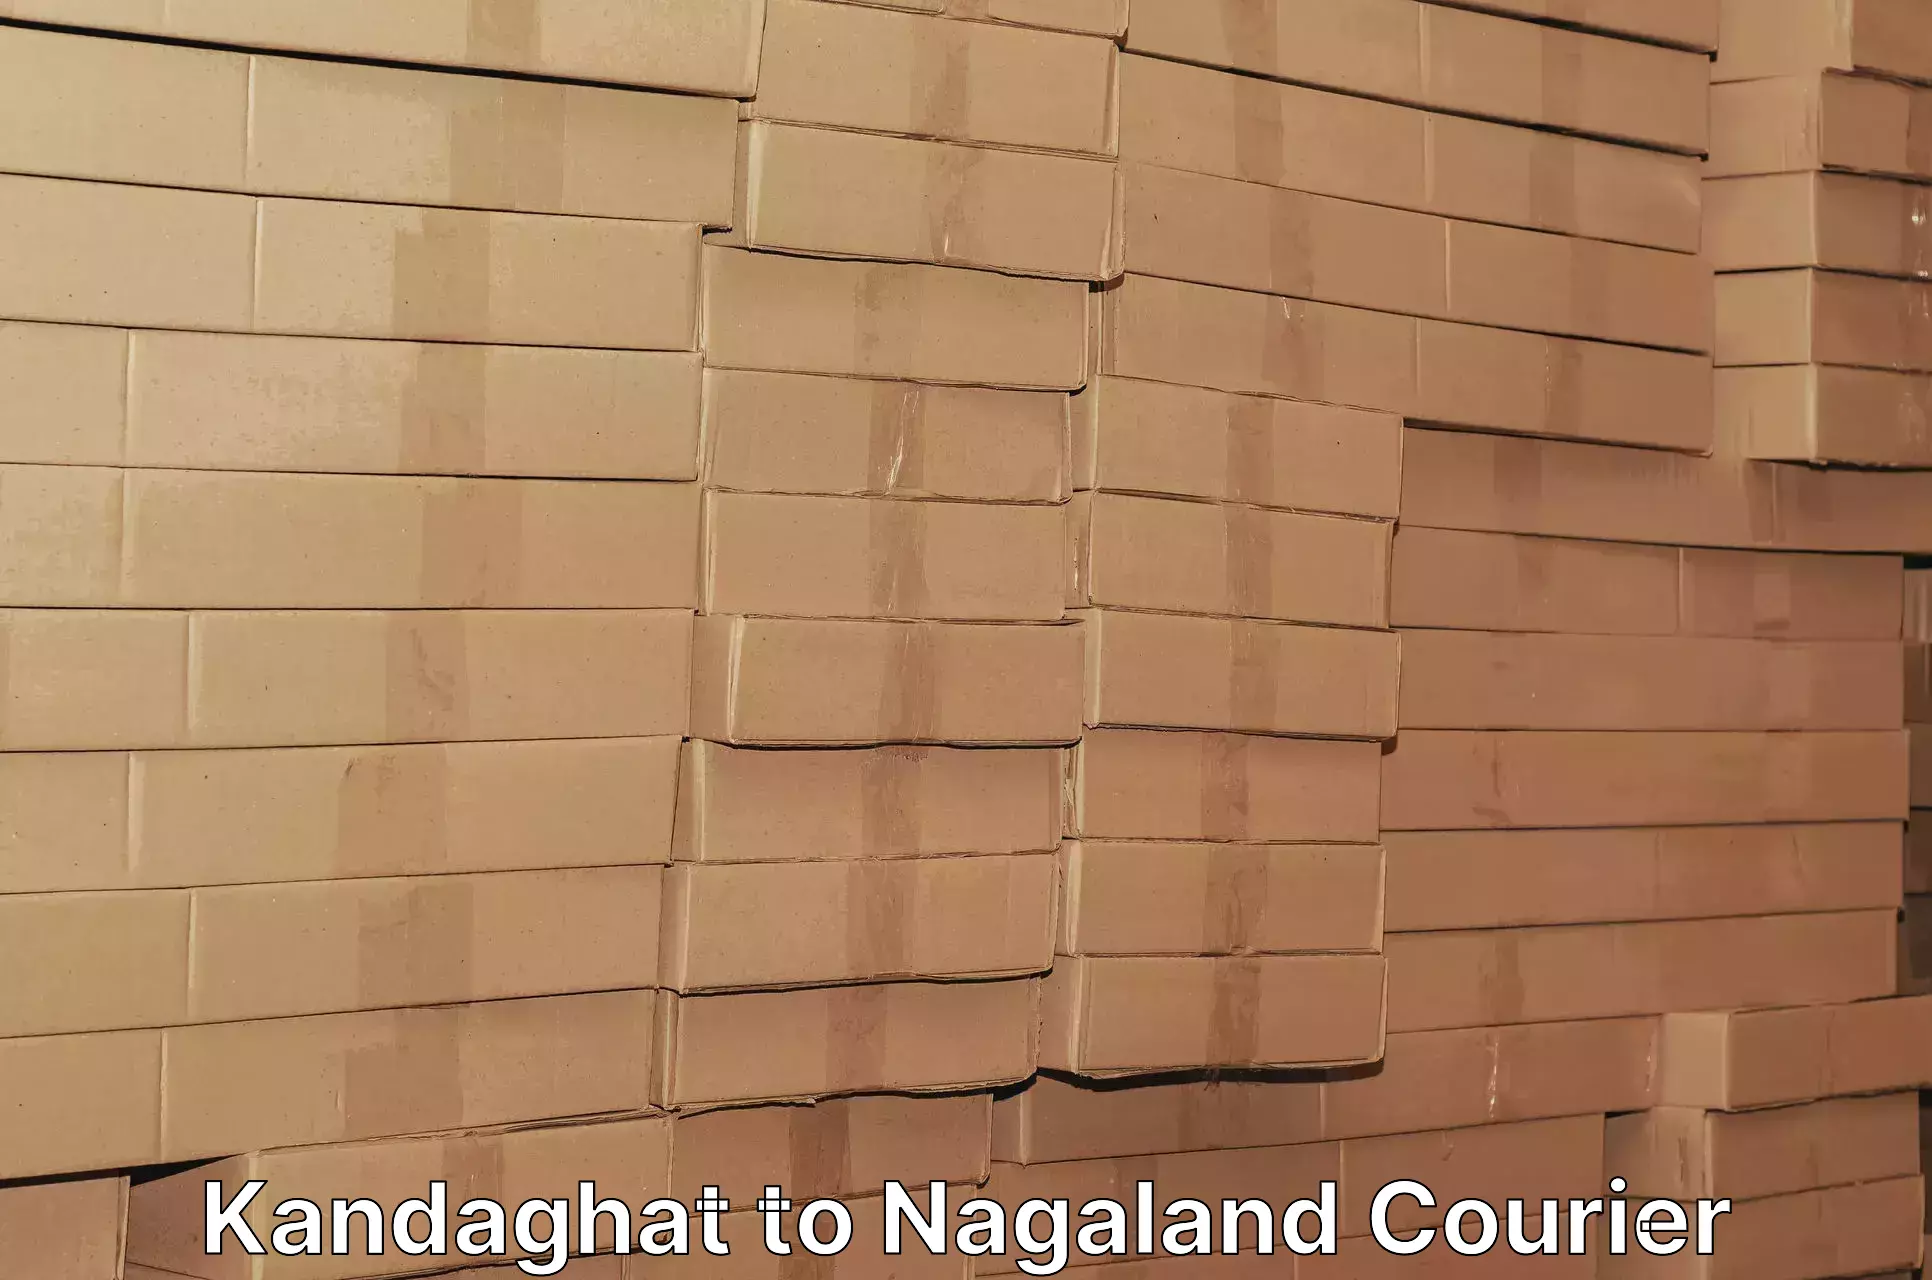 Courier service efficiency Kandaghat to Nagaland